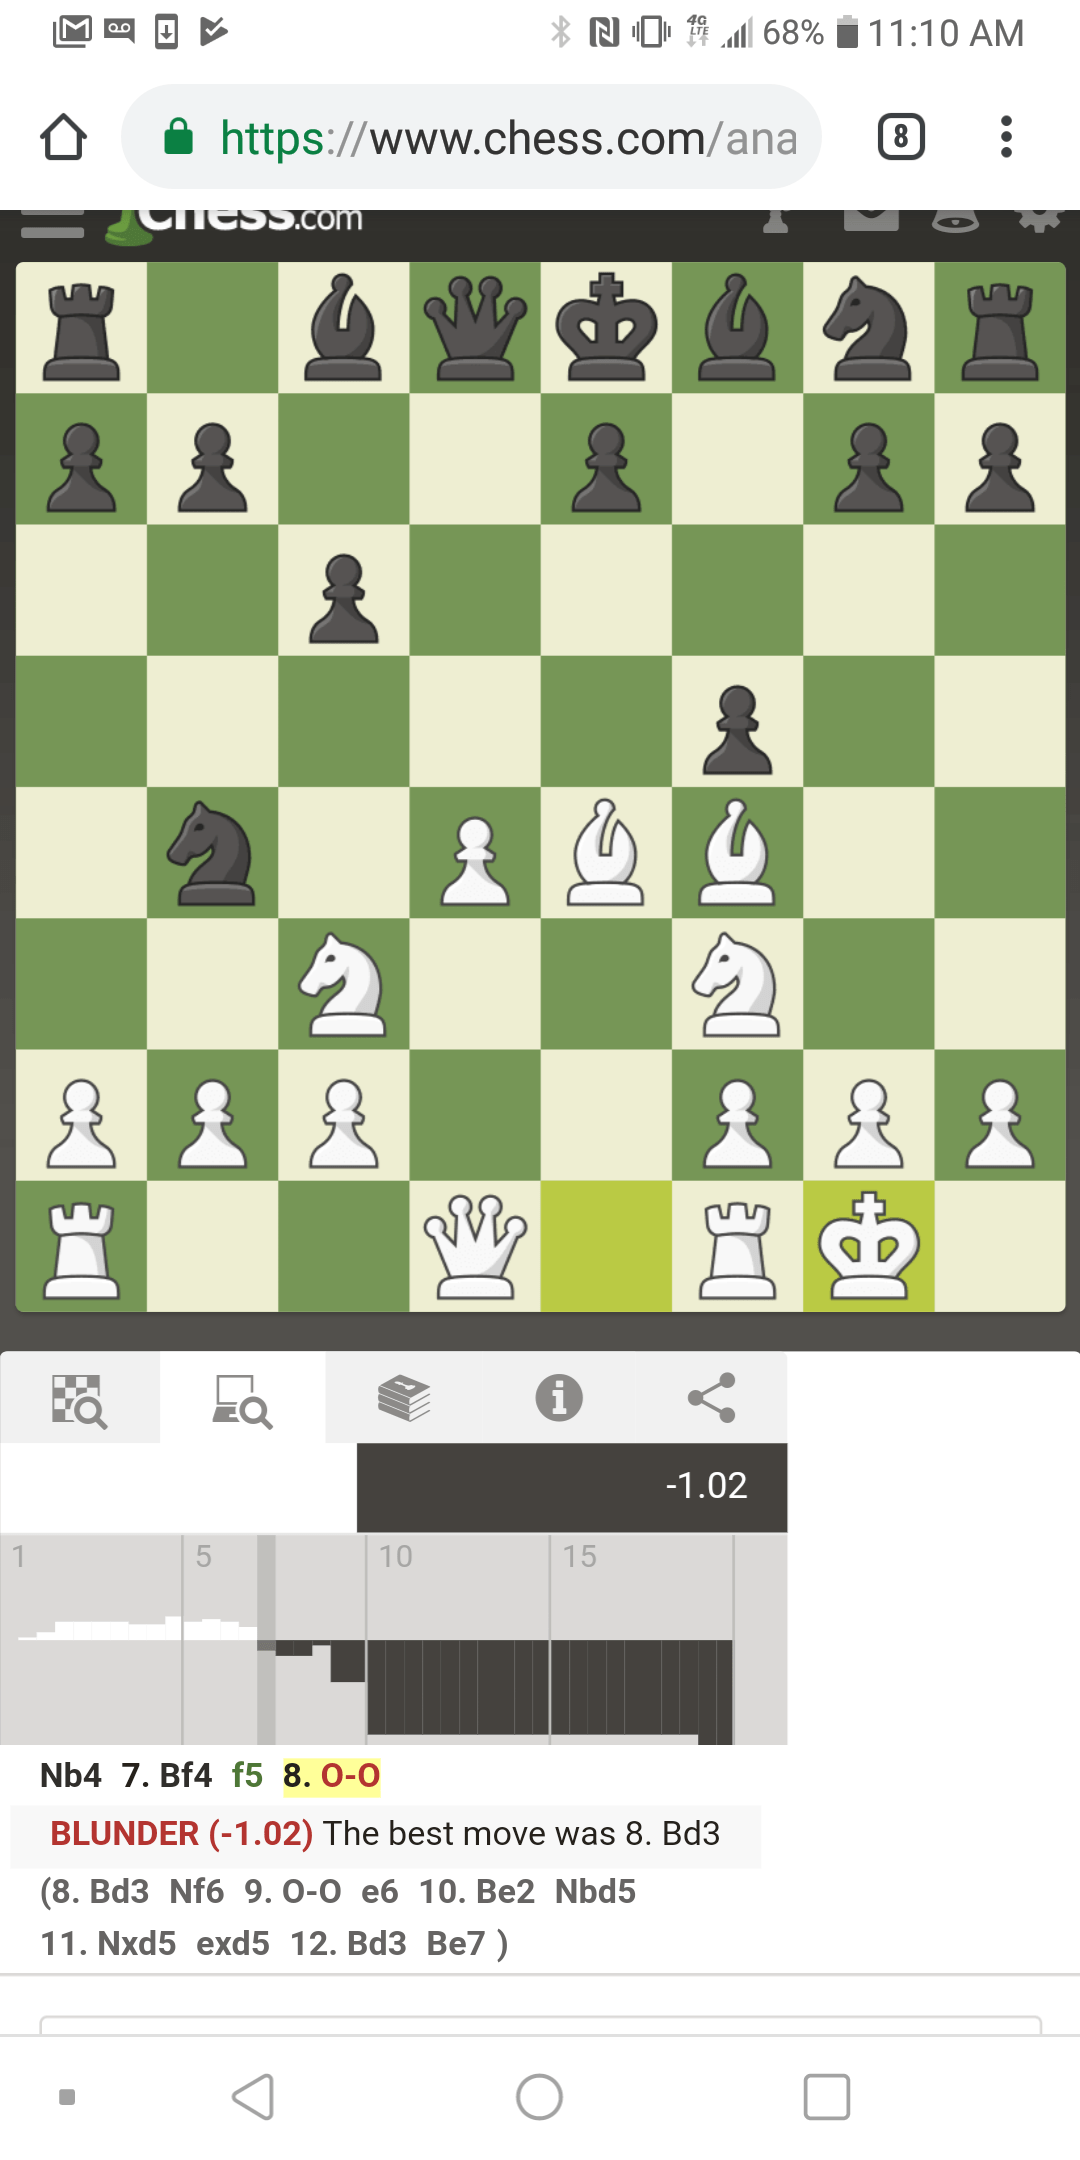 Would anyone care to explain why 0-0 was a blunder? - Chess Forums 